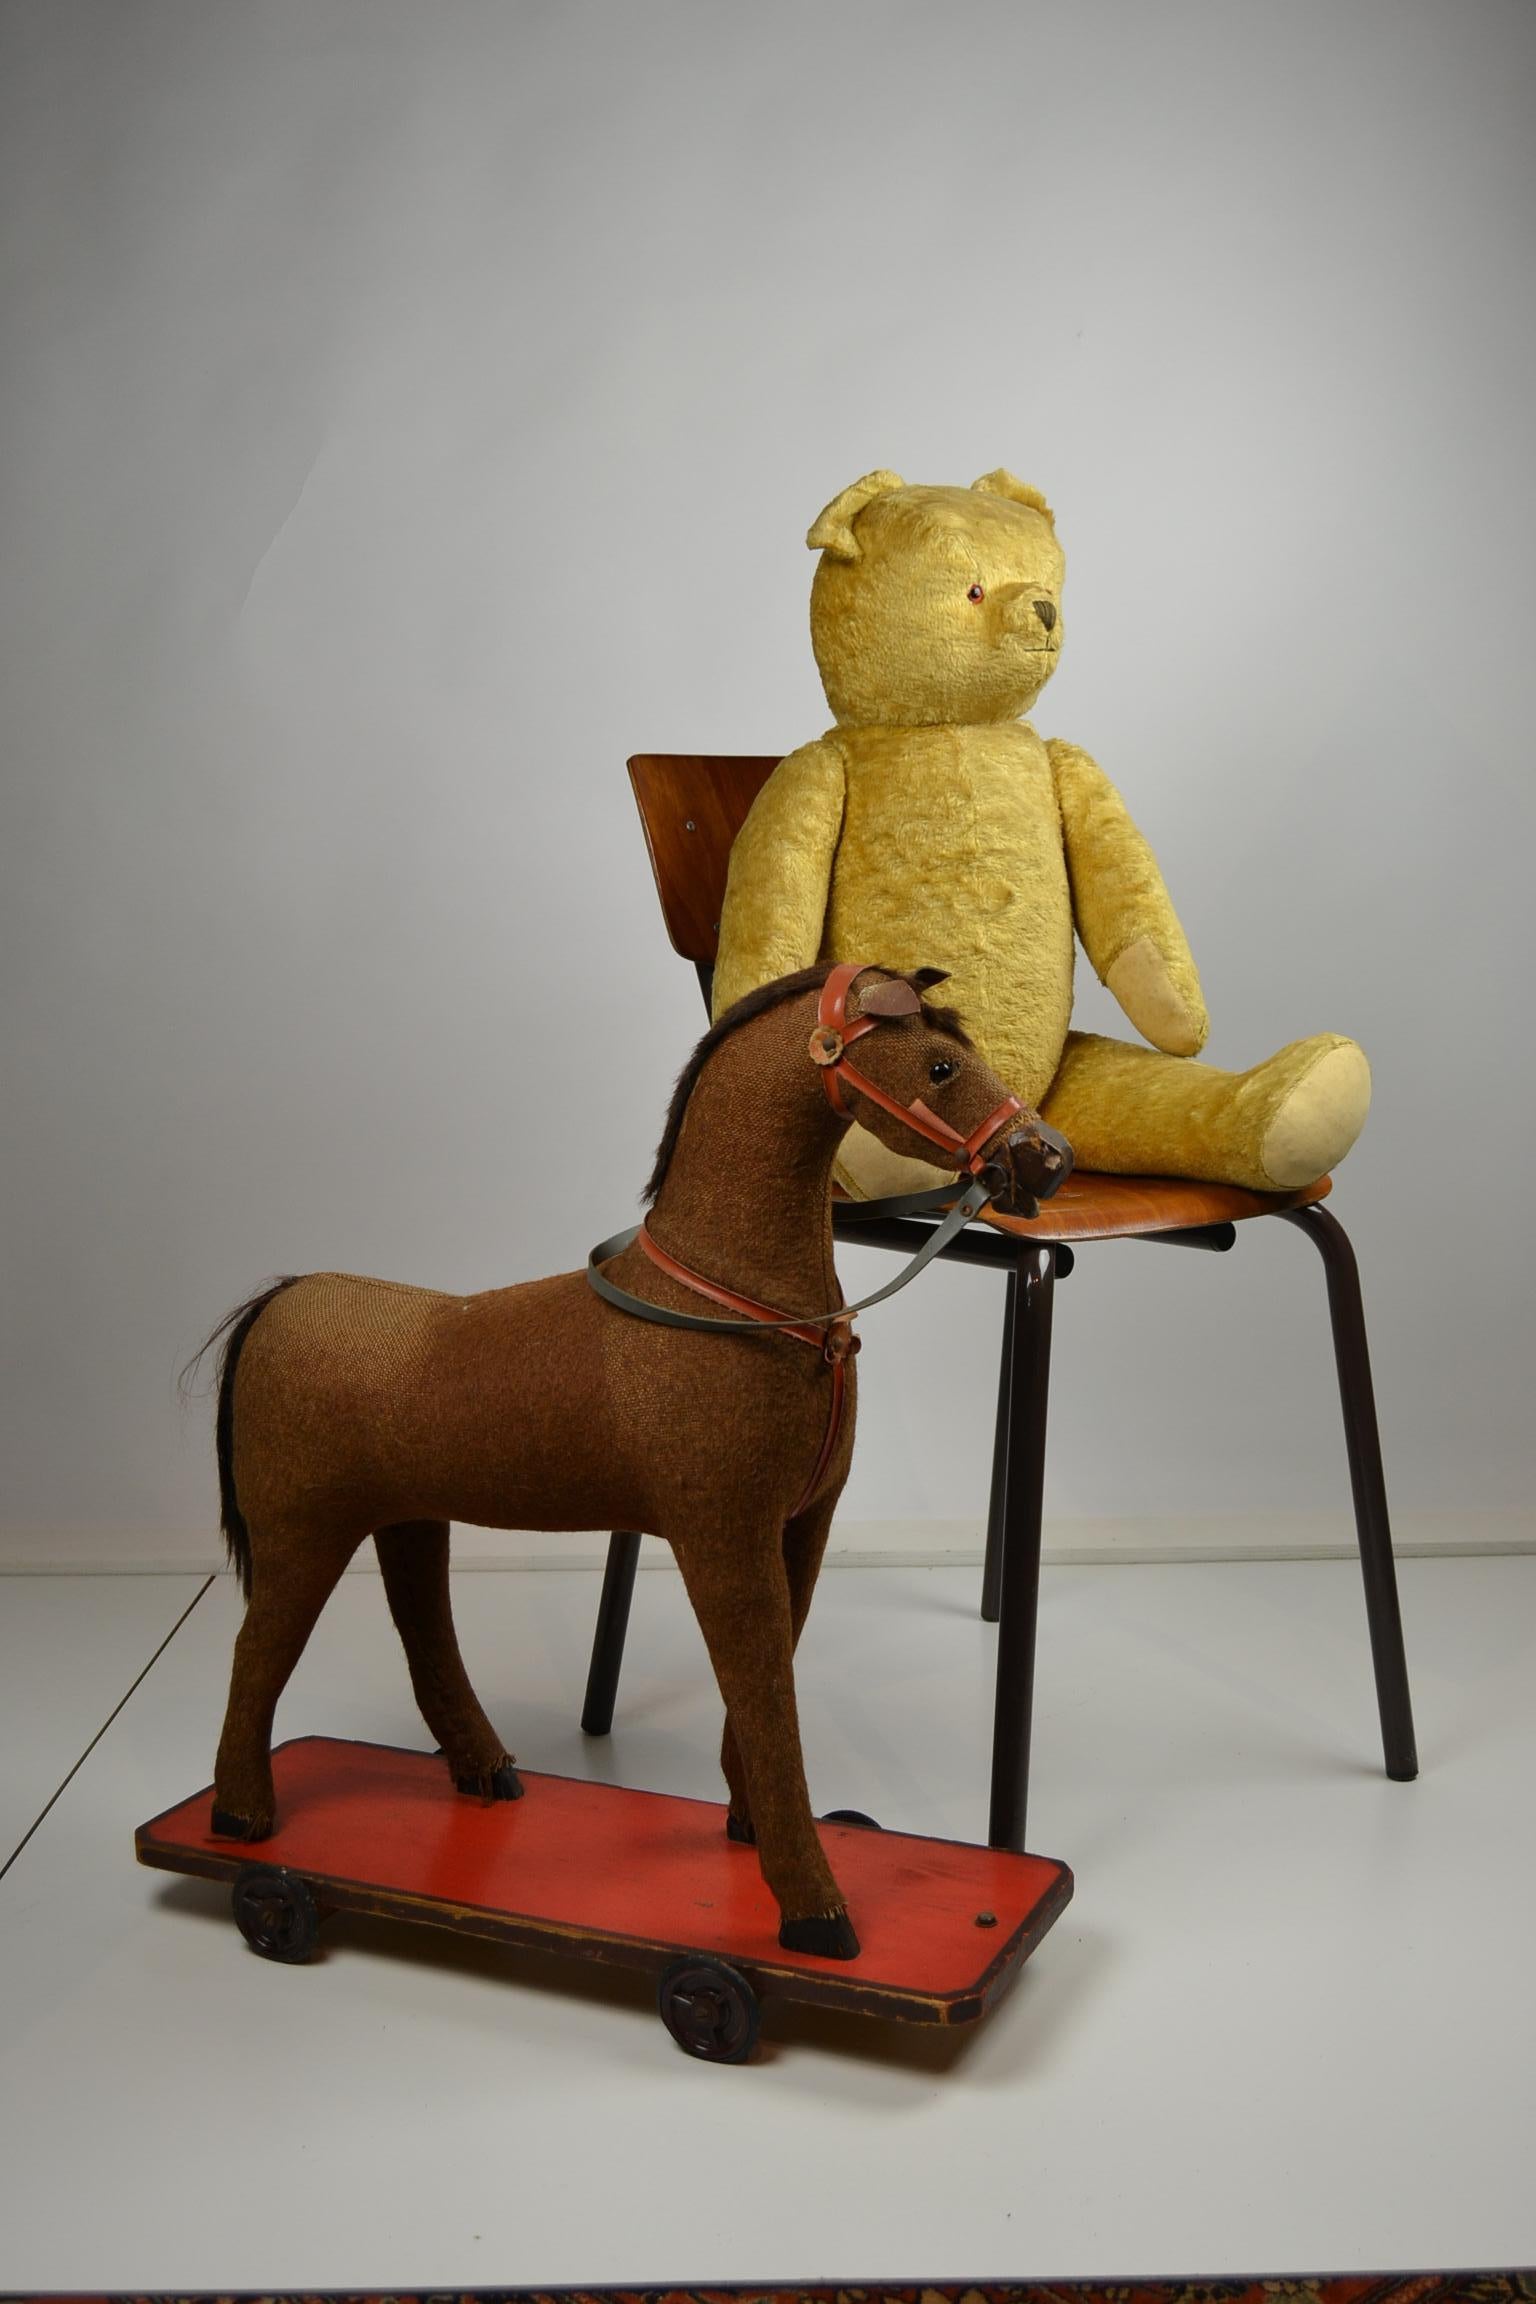 Cute large murmur bear toy filled with straw.
This vintage toy doll bear - teddy bear dates from the 1940-1950s,
has glass eyes, embroidered nose, movable arms, legs and head. 

Large bear: Standing: 31,10 inch - 79 cm H 
 Sitting: 22.04 inch -